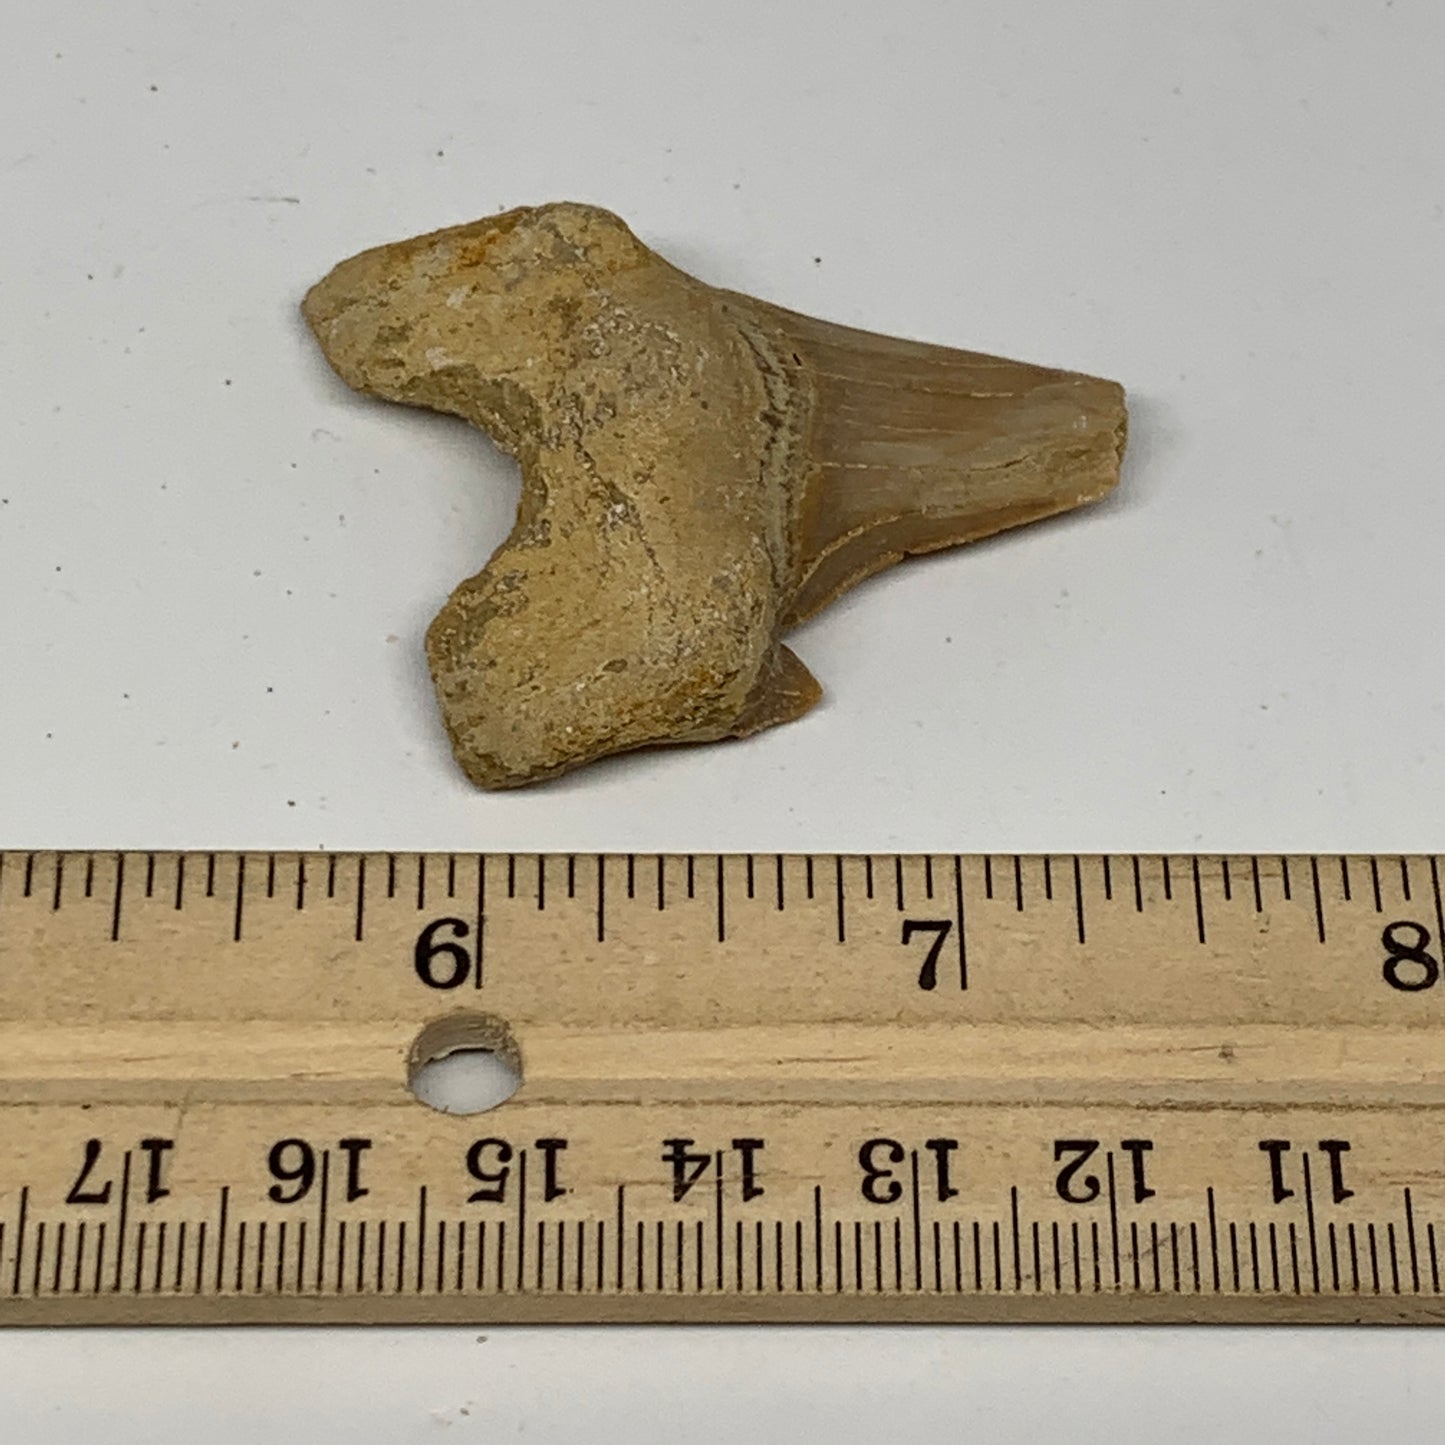 16.9g, 1.7"X 1.5"x 0.6" Natural Fossils Fish Shark Tooth @Morocco, B12662